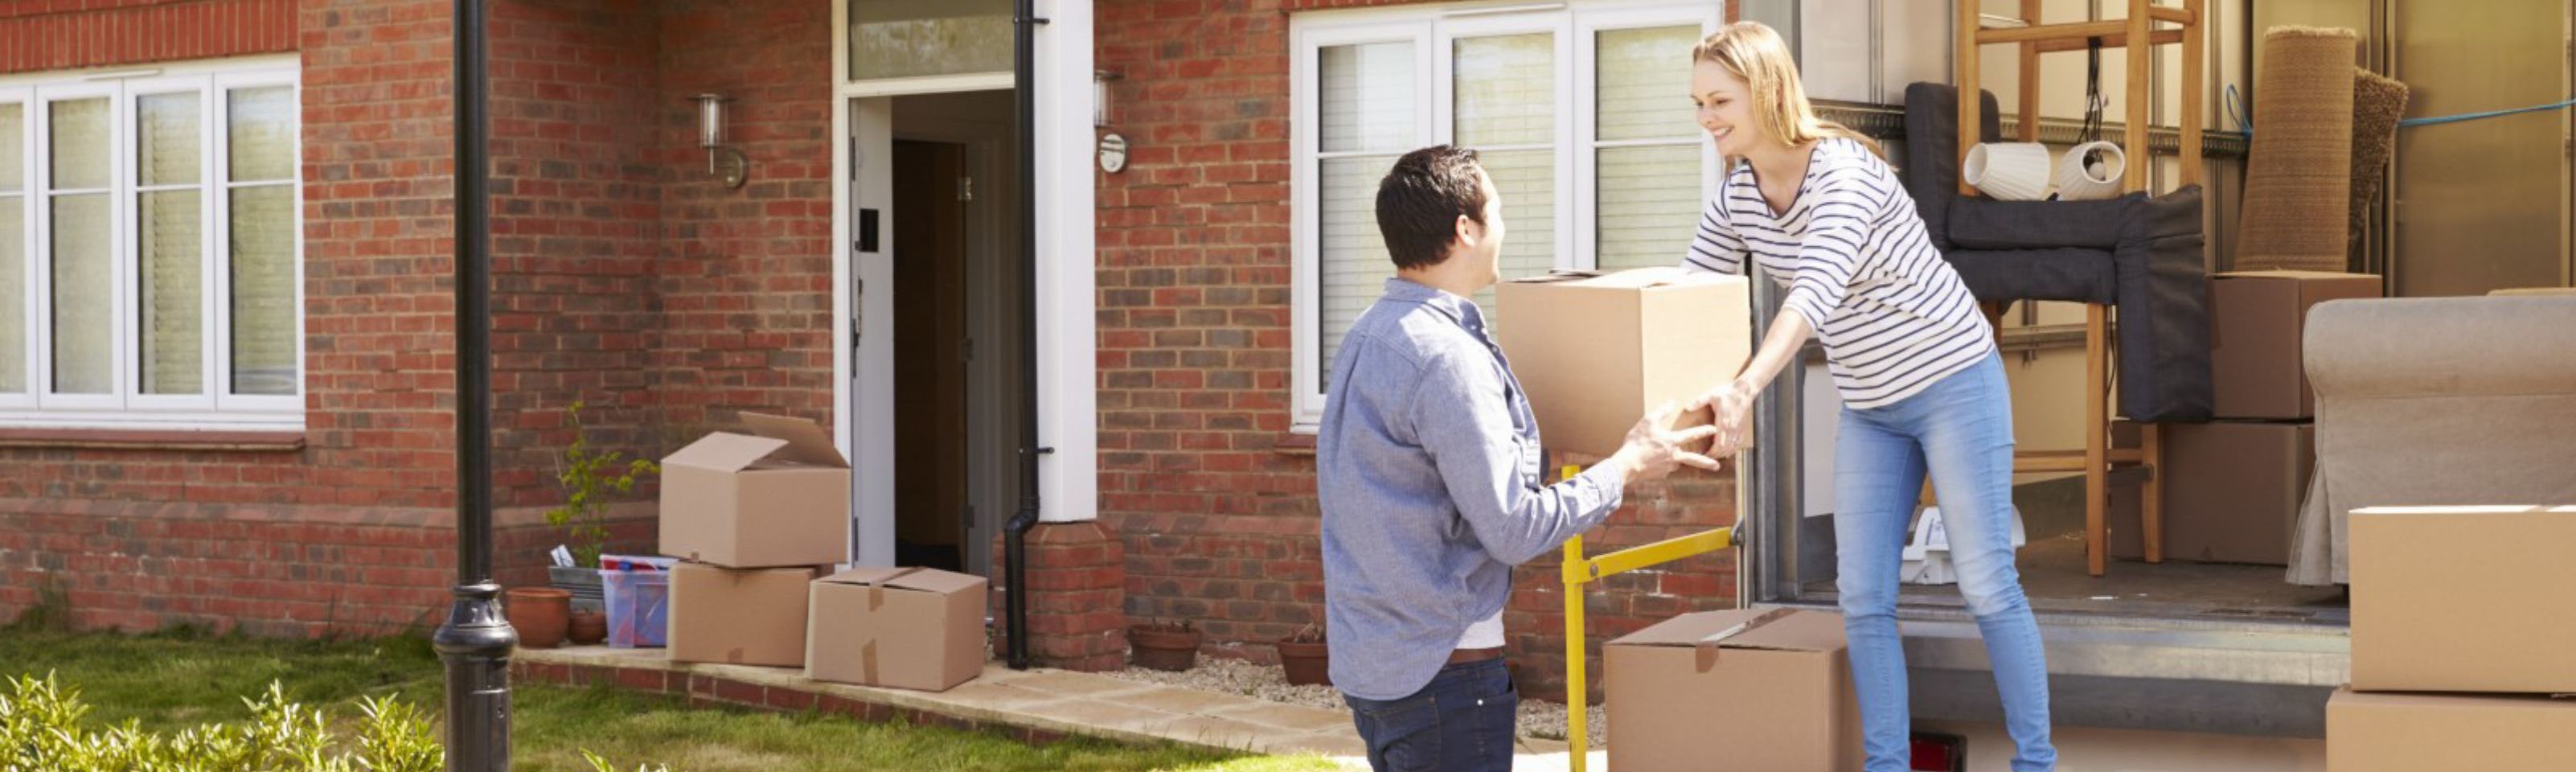 4 ways to make home moving easier during the Covid-19 pandemic